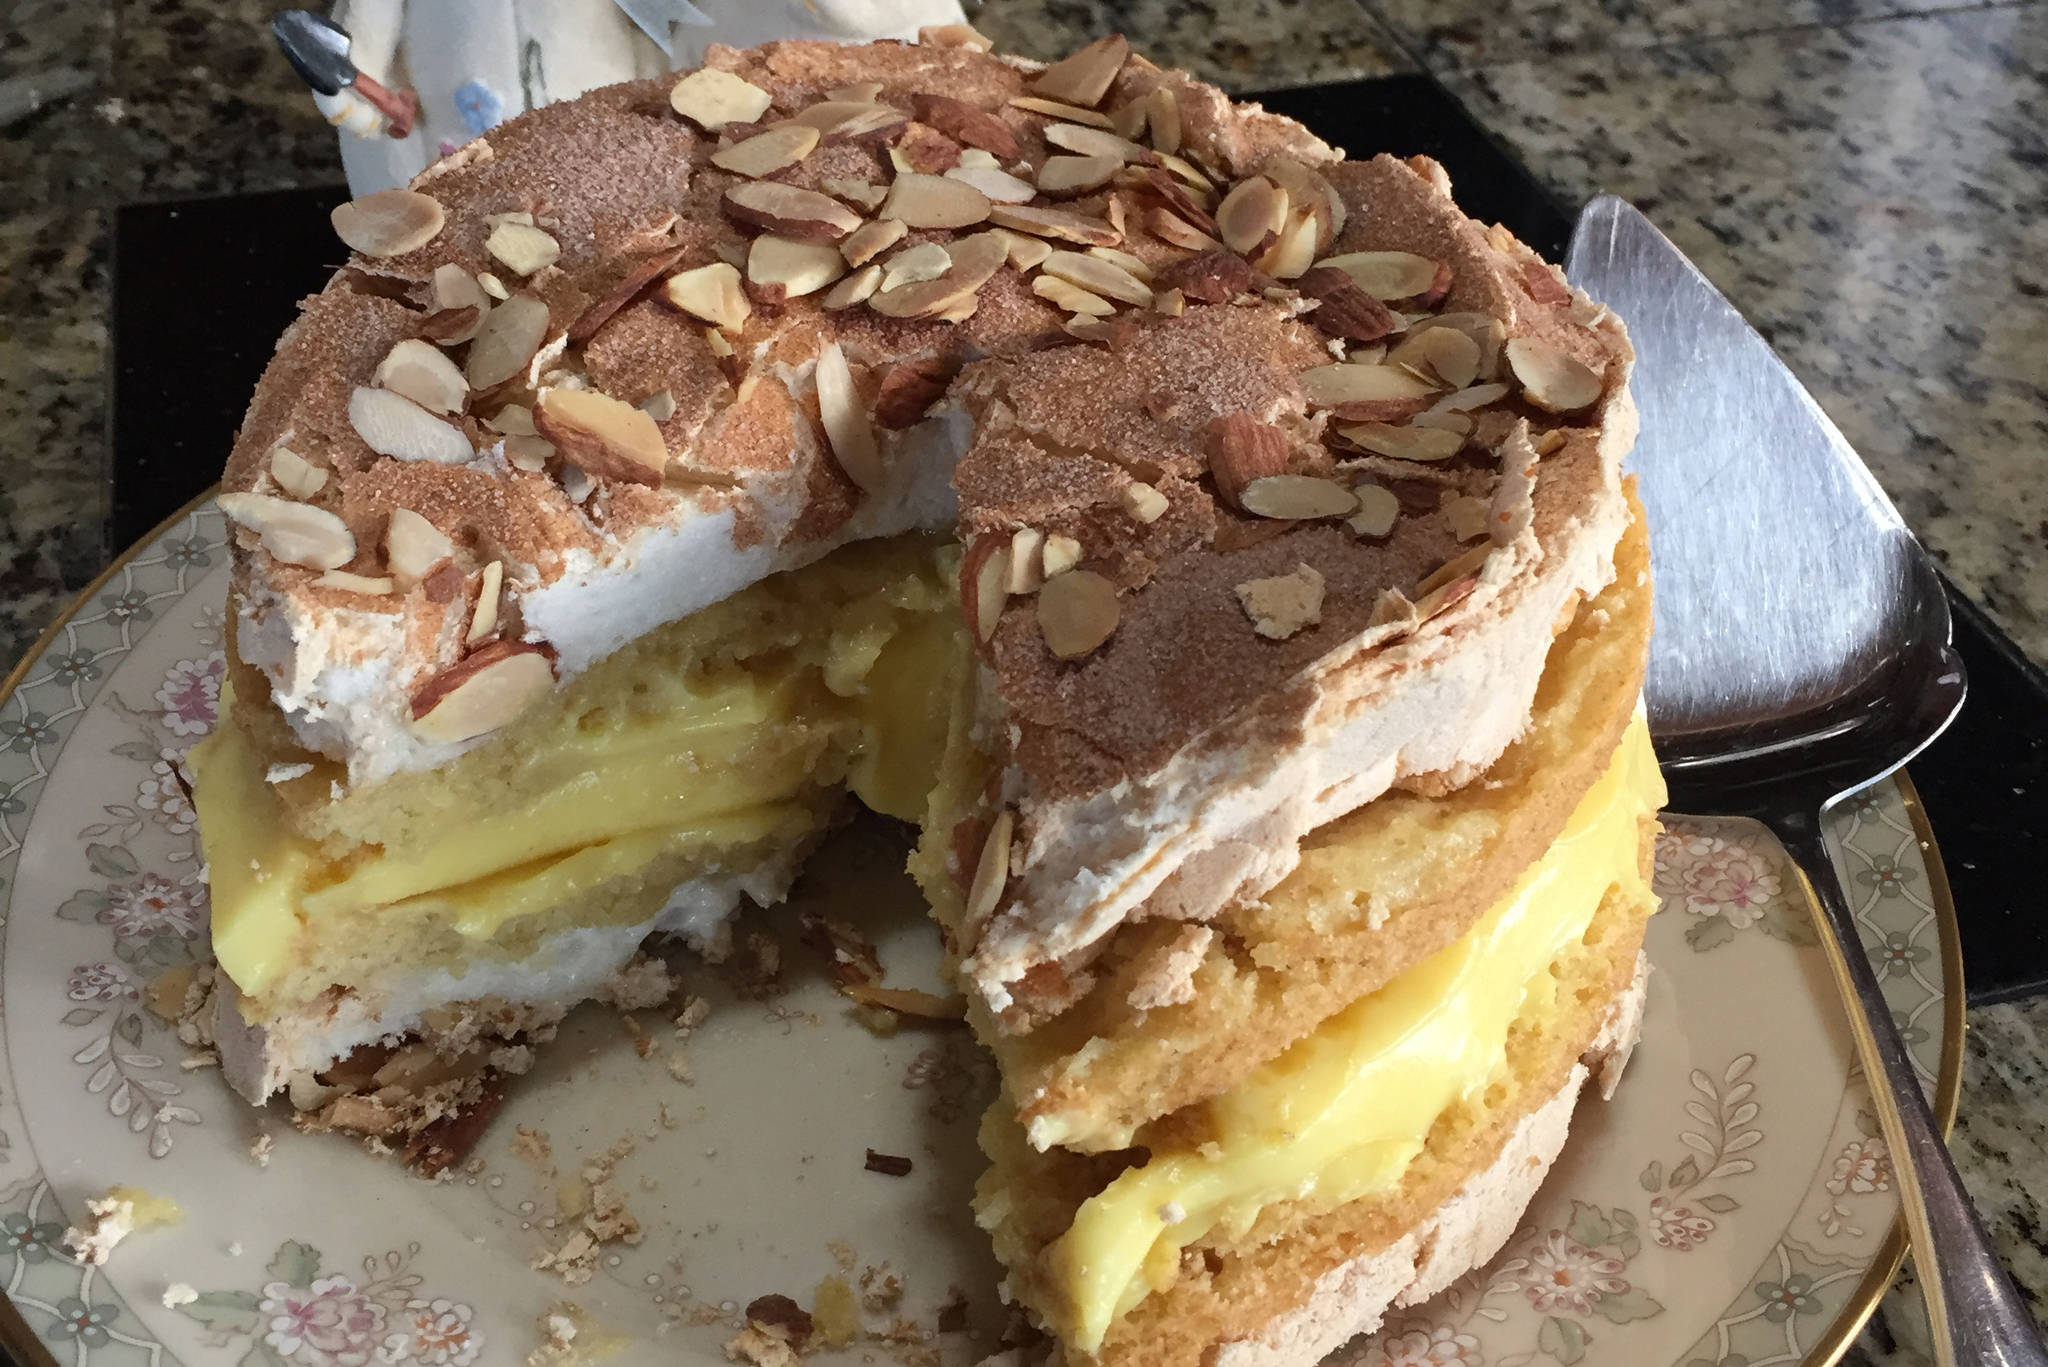 Blitz Torte makes a perfect Easter dessert, as seen in the recipe made by Teri Robl in her Homer, Alaska, kitchen on April 16, 2019. (Photo by Teri Robl)